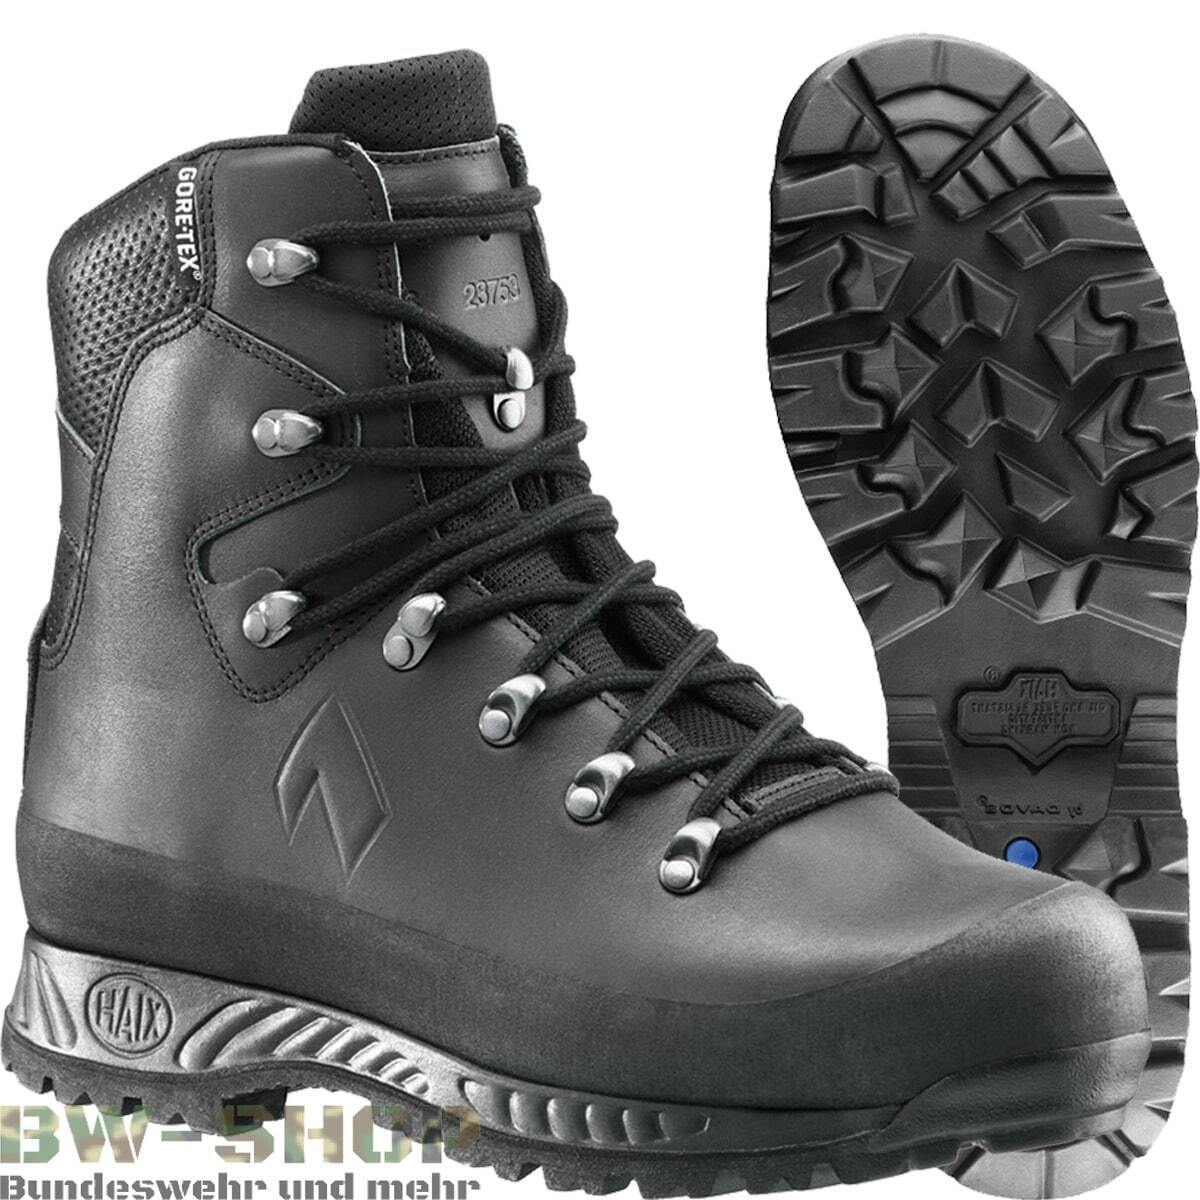 ORIGINAL BUNDESWEHR HAIX MOUNTAIN BOOTS KSK 3000 BW MOUNTAIN SHOES ARMY BOOTS SHOES